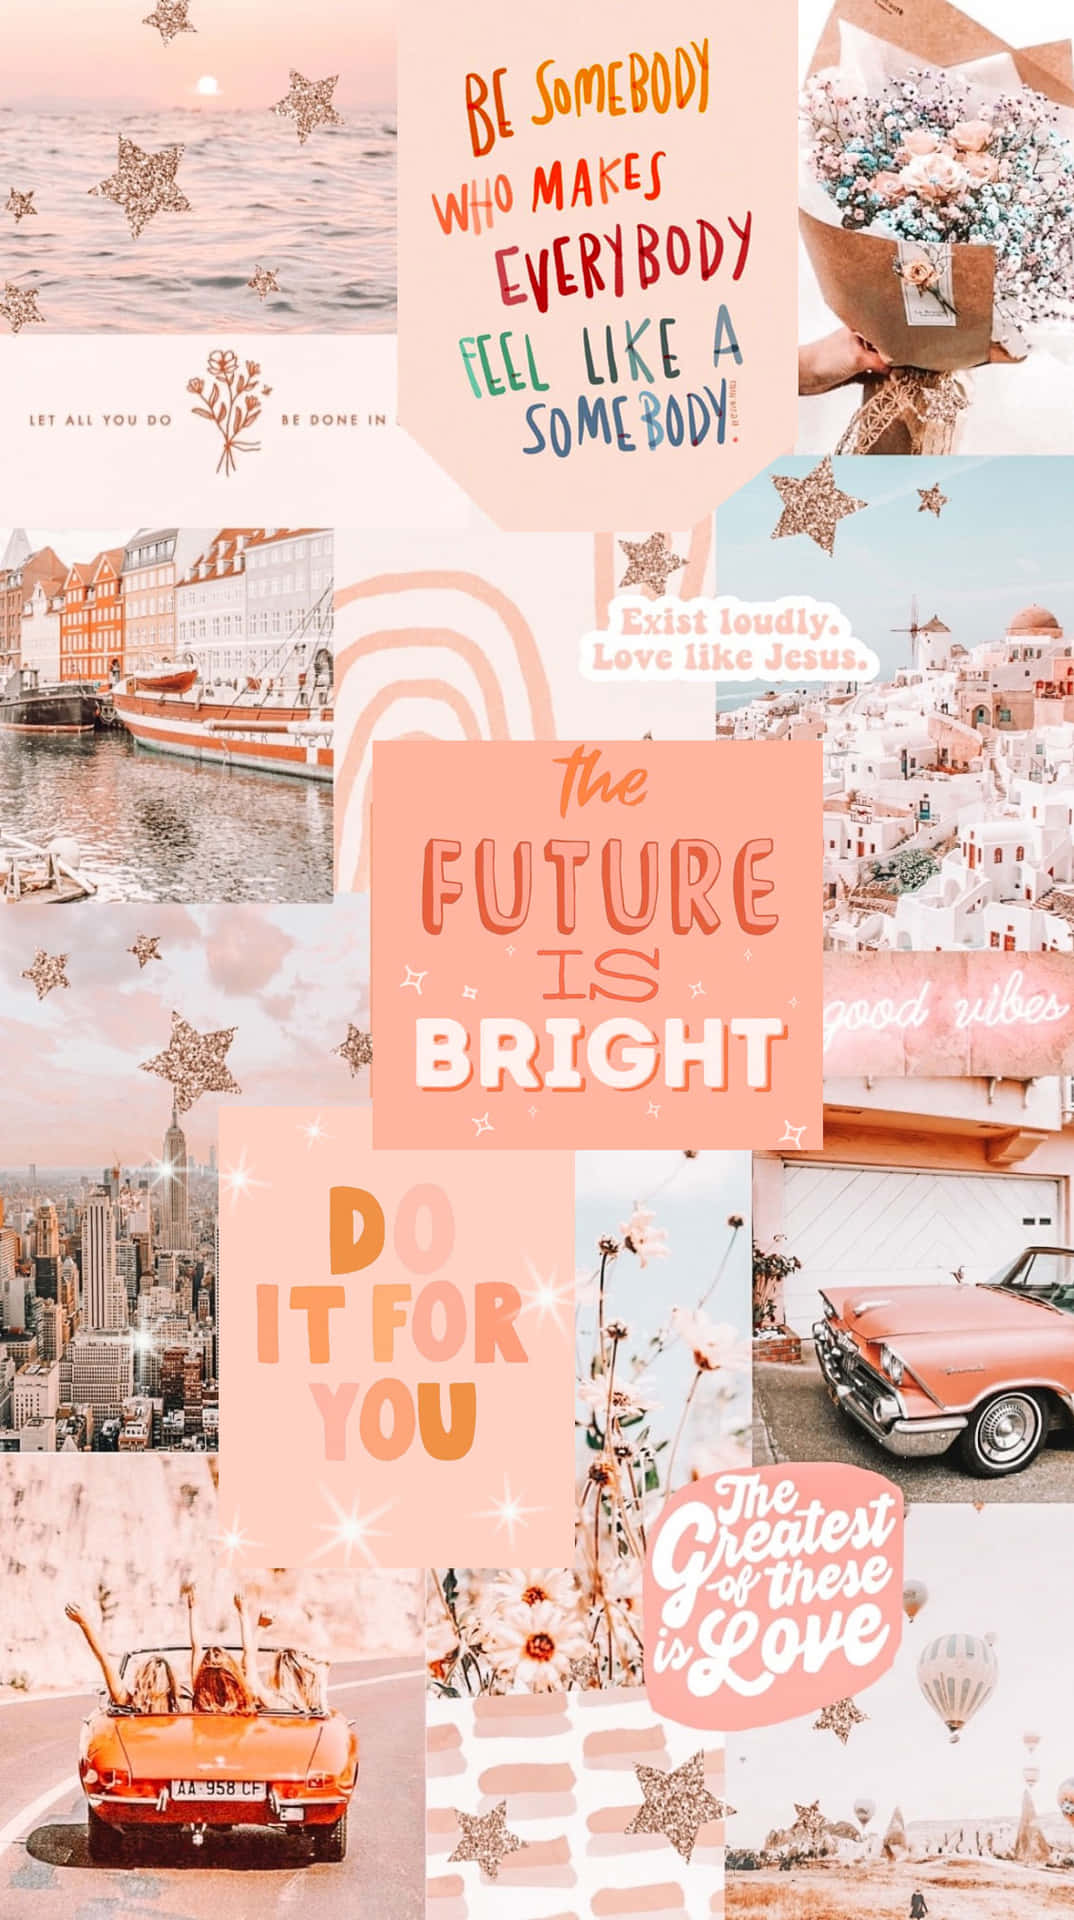 The Future Bright By Sarah Saunders Background